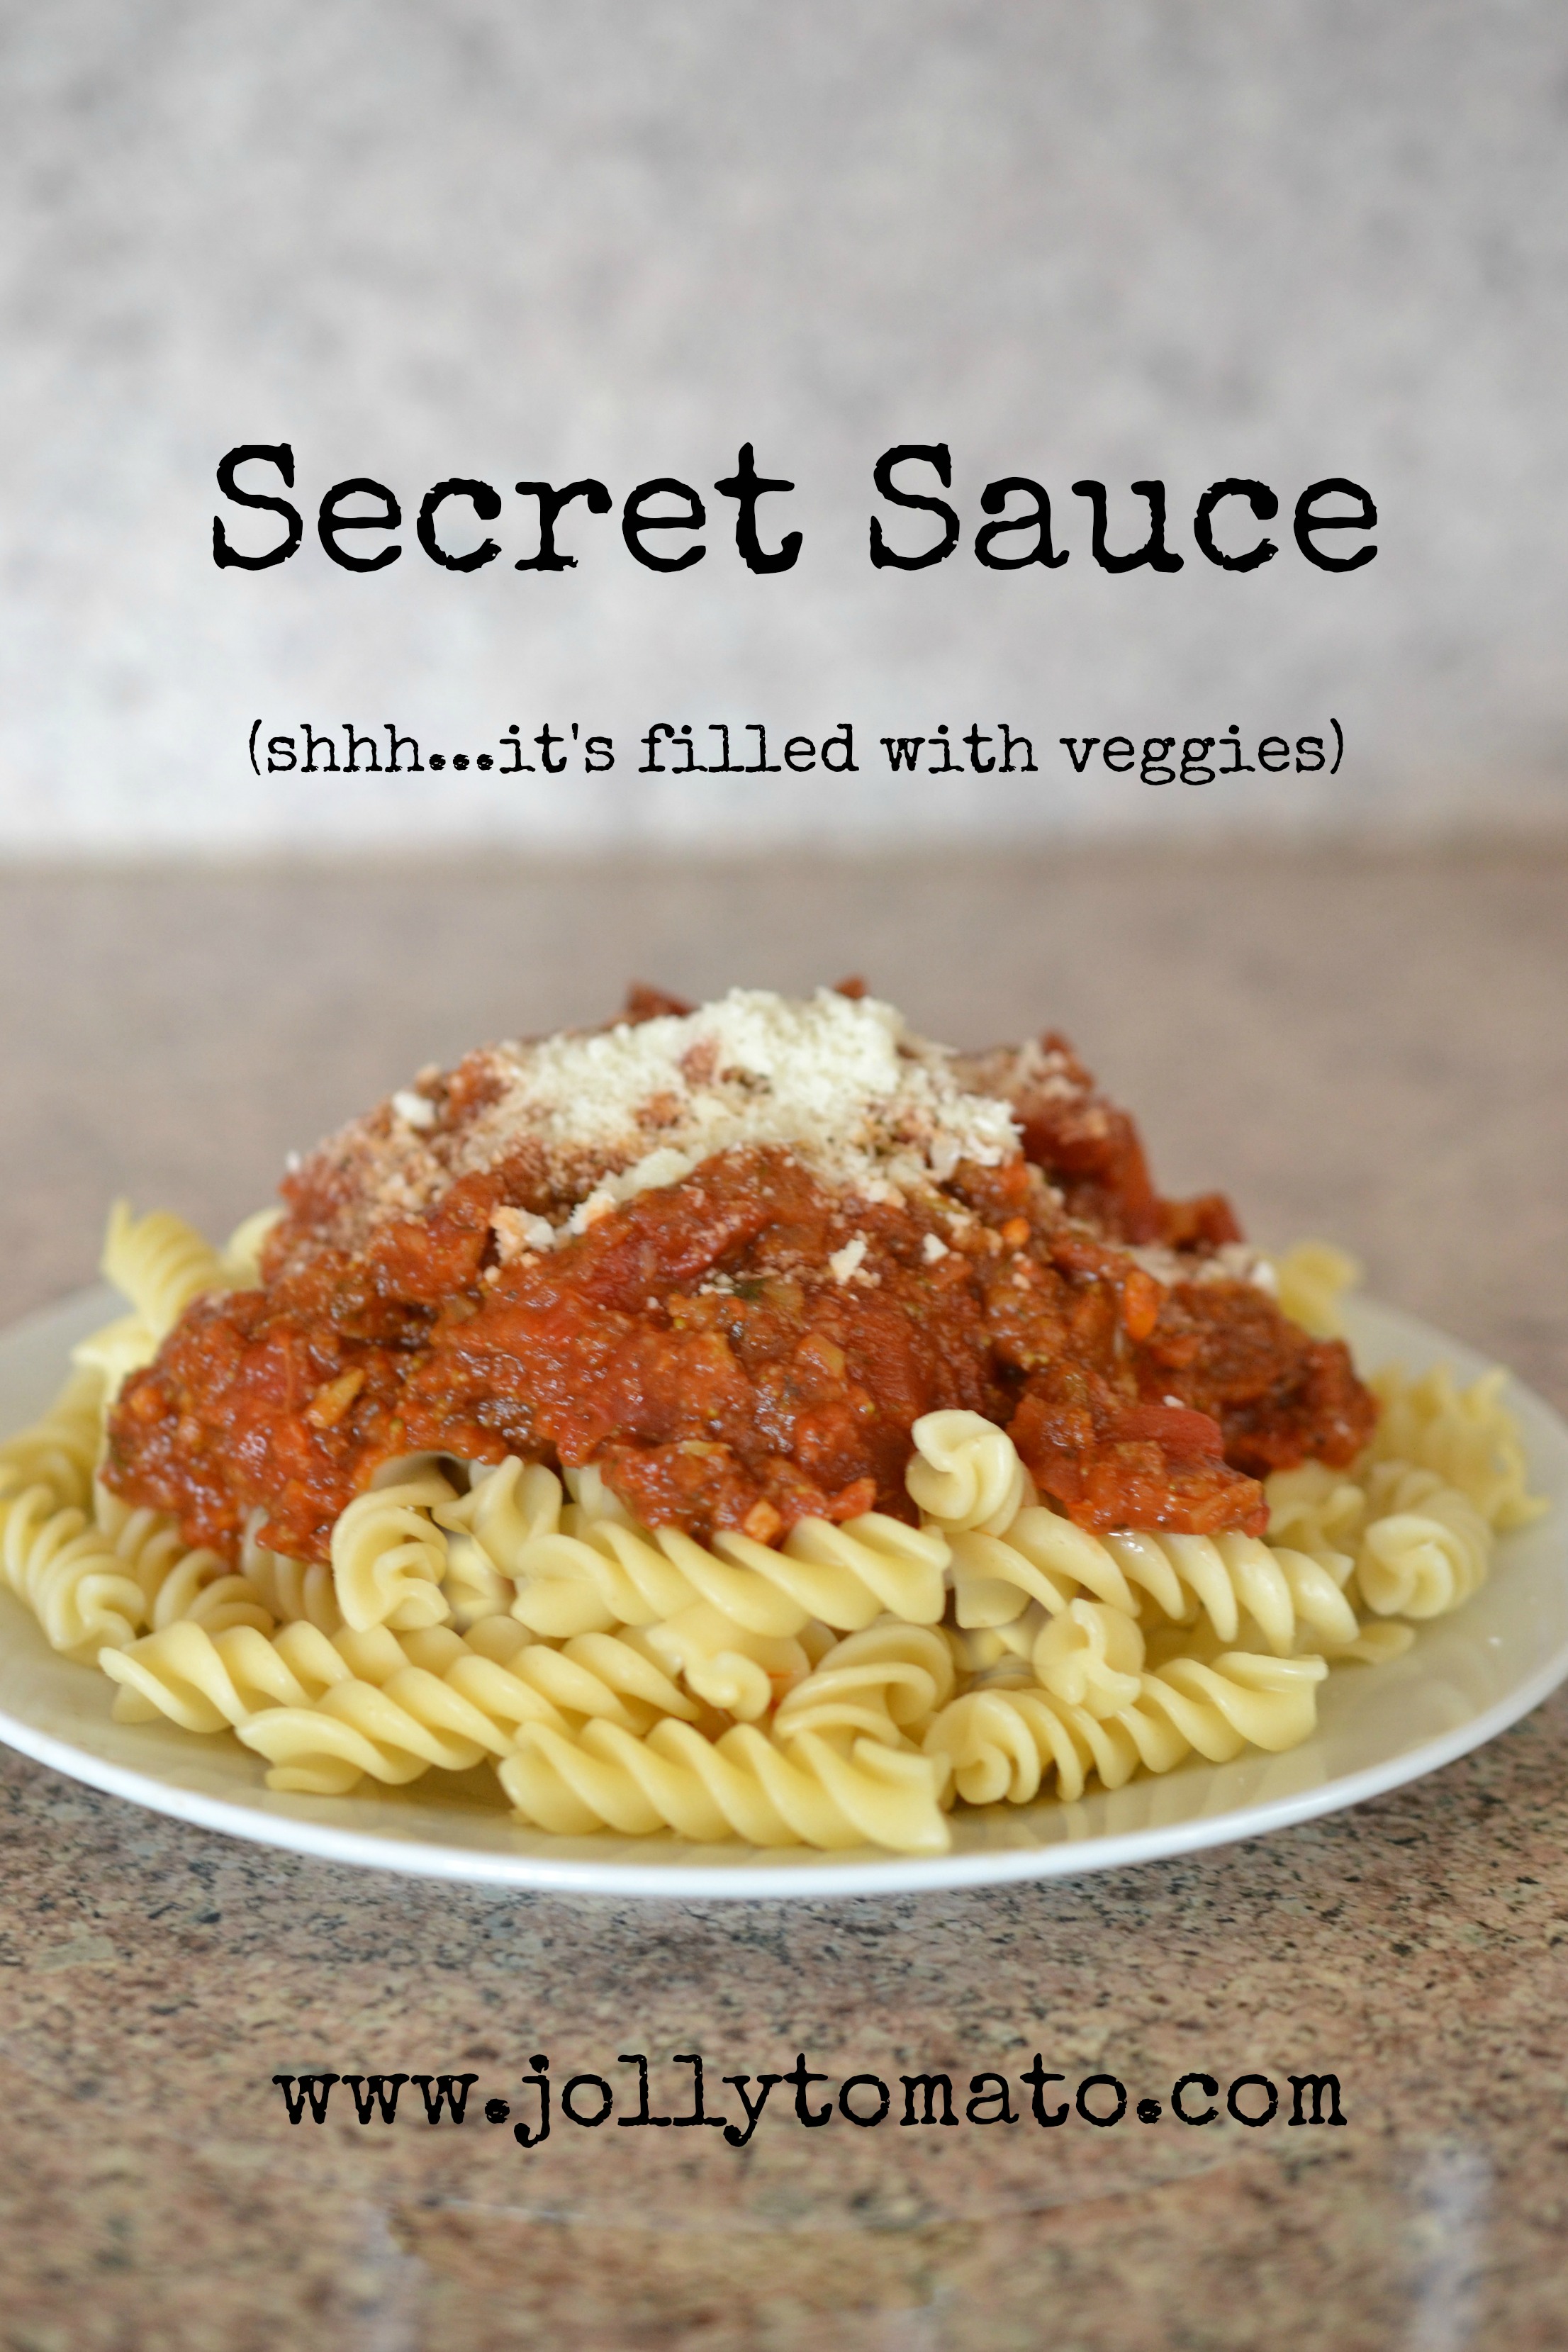 Secret Sauce - A Sauce Filled With Veggies - Jolly Tomato